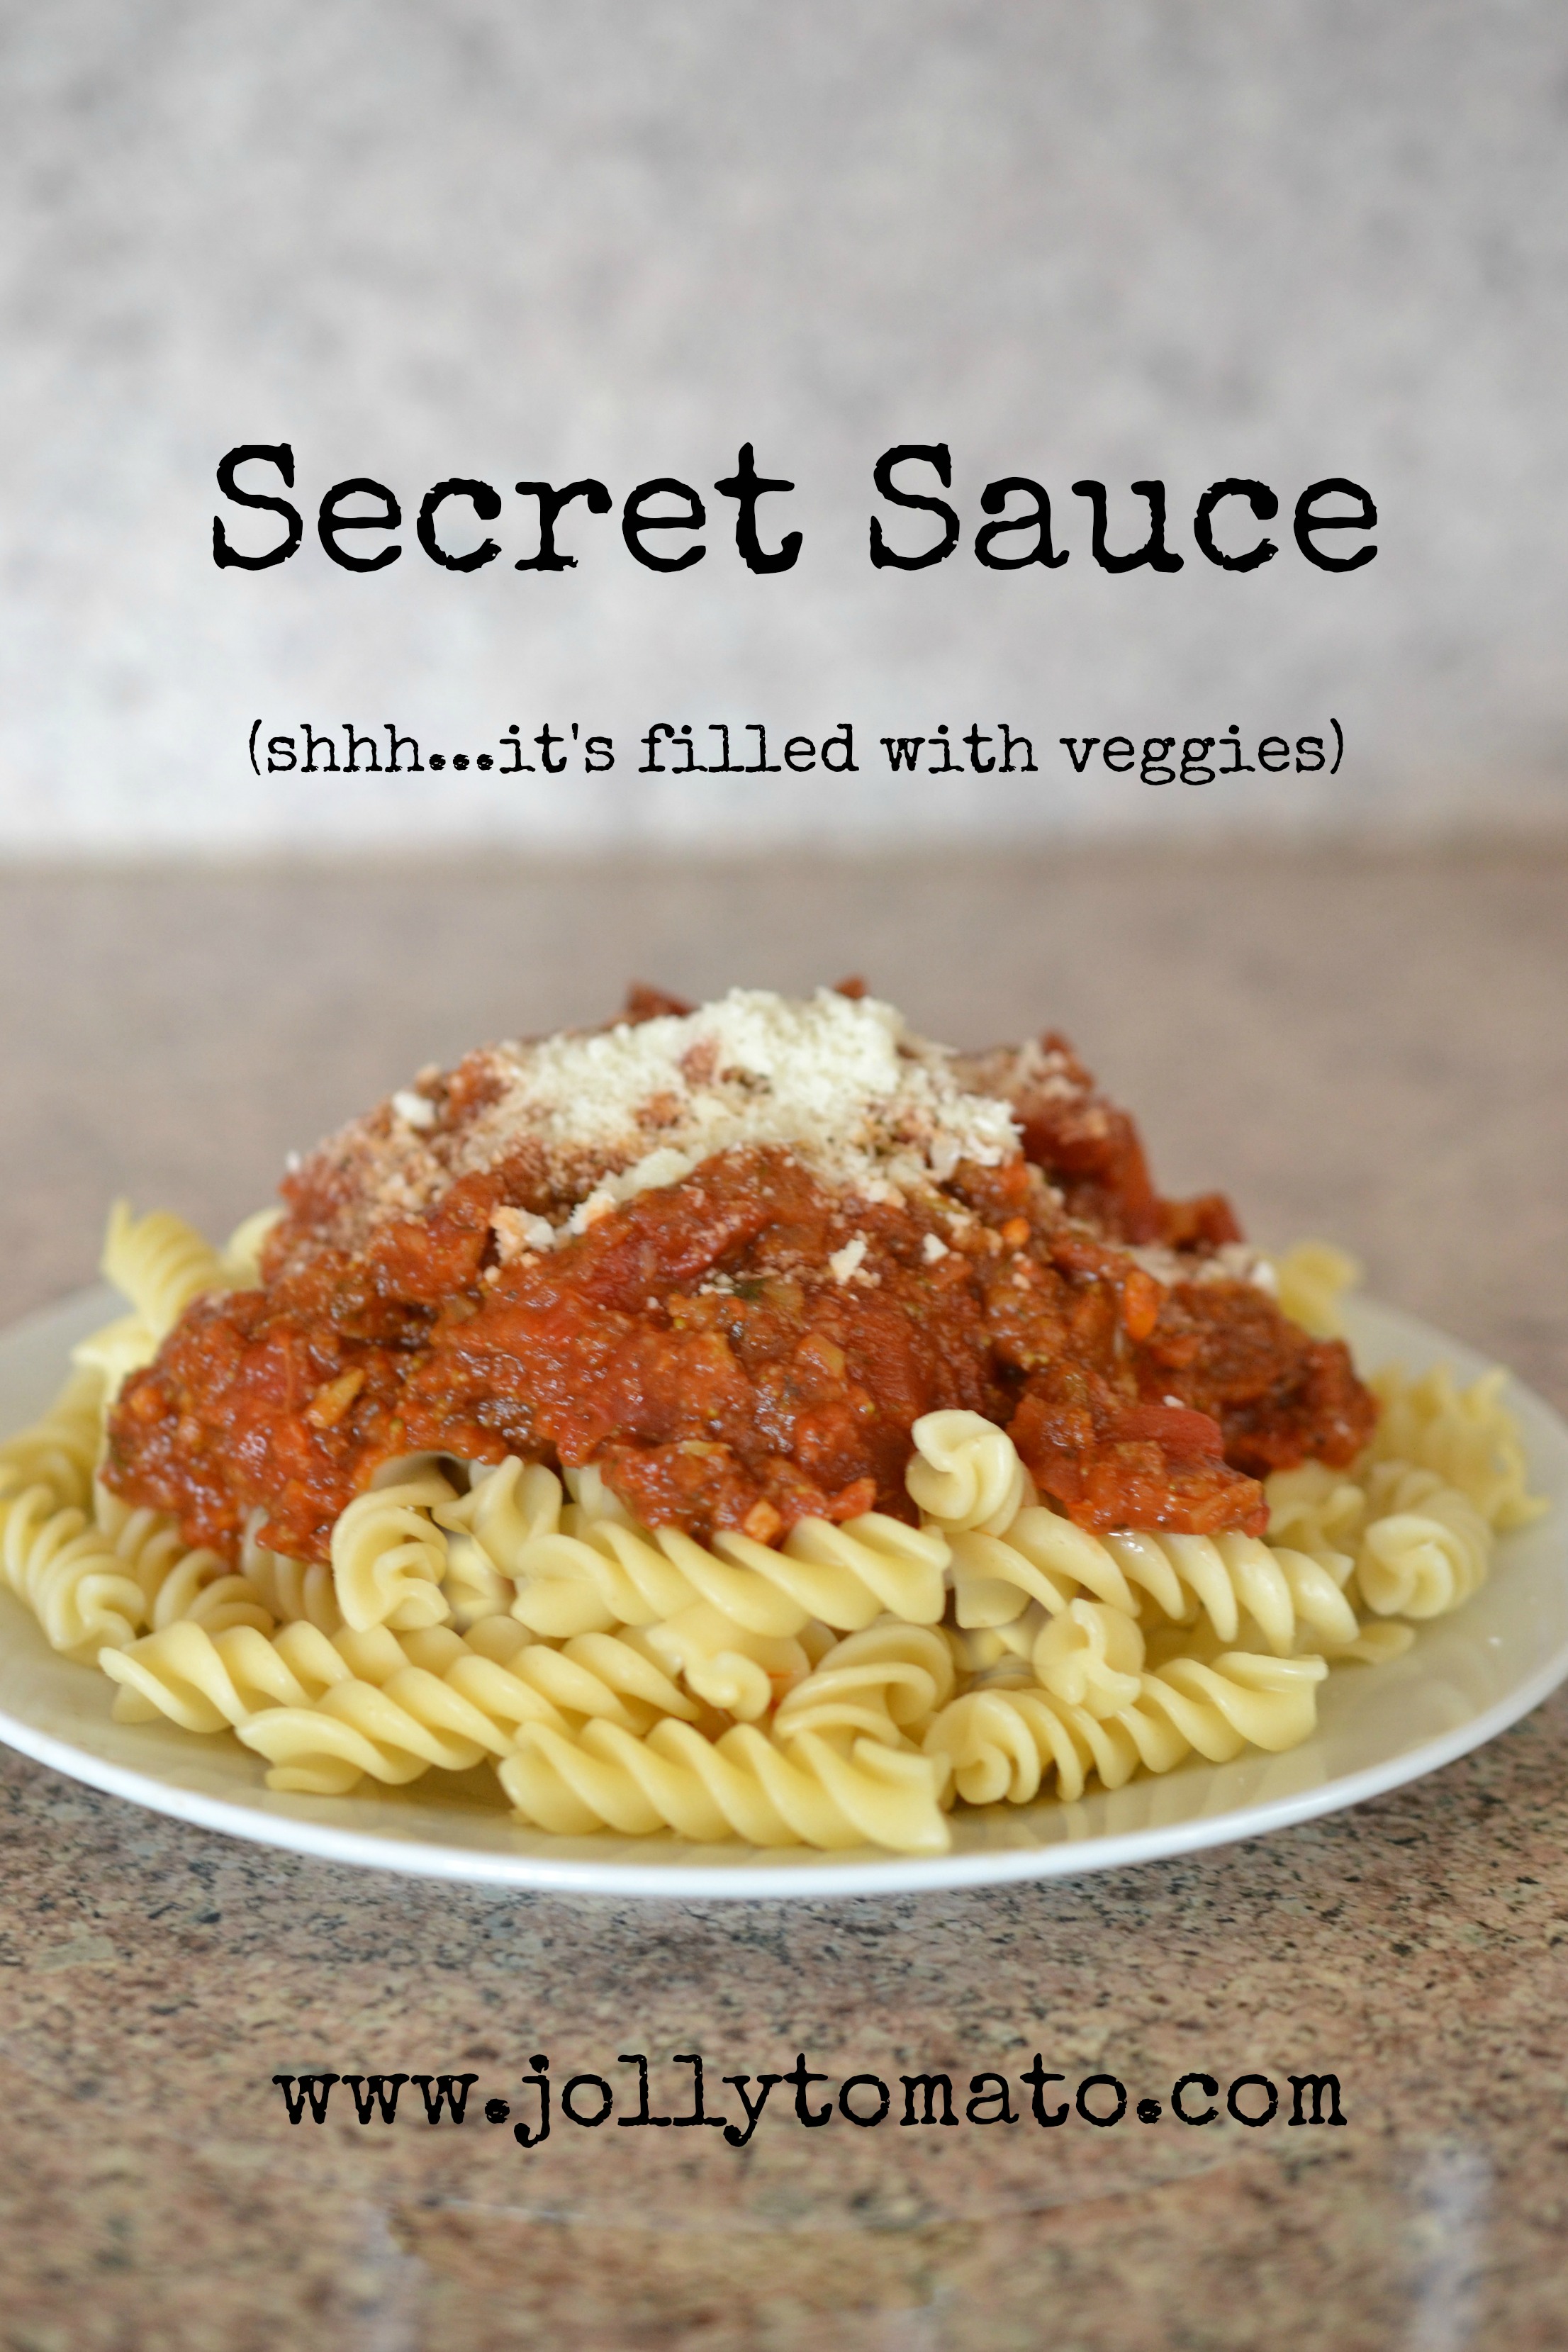 Secret Sauce - A Sauce Filled With Veggies - Jolly Tomato